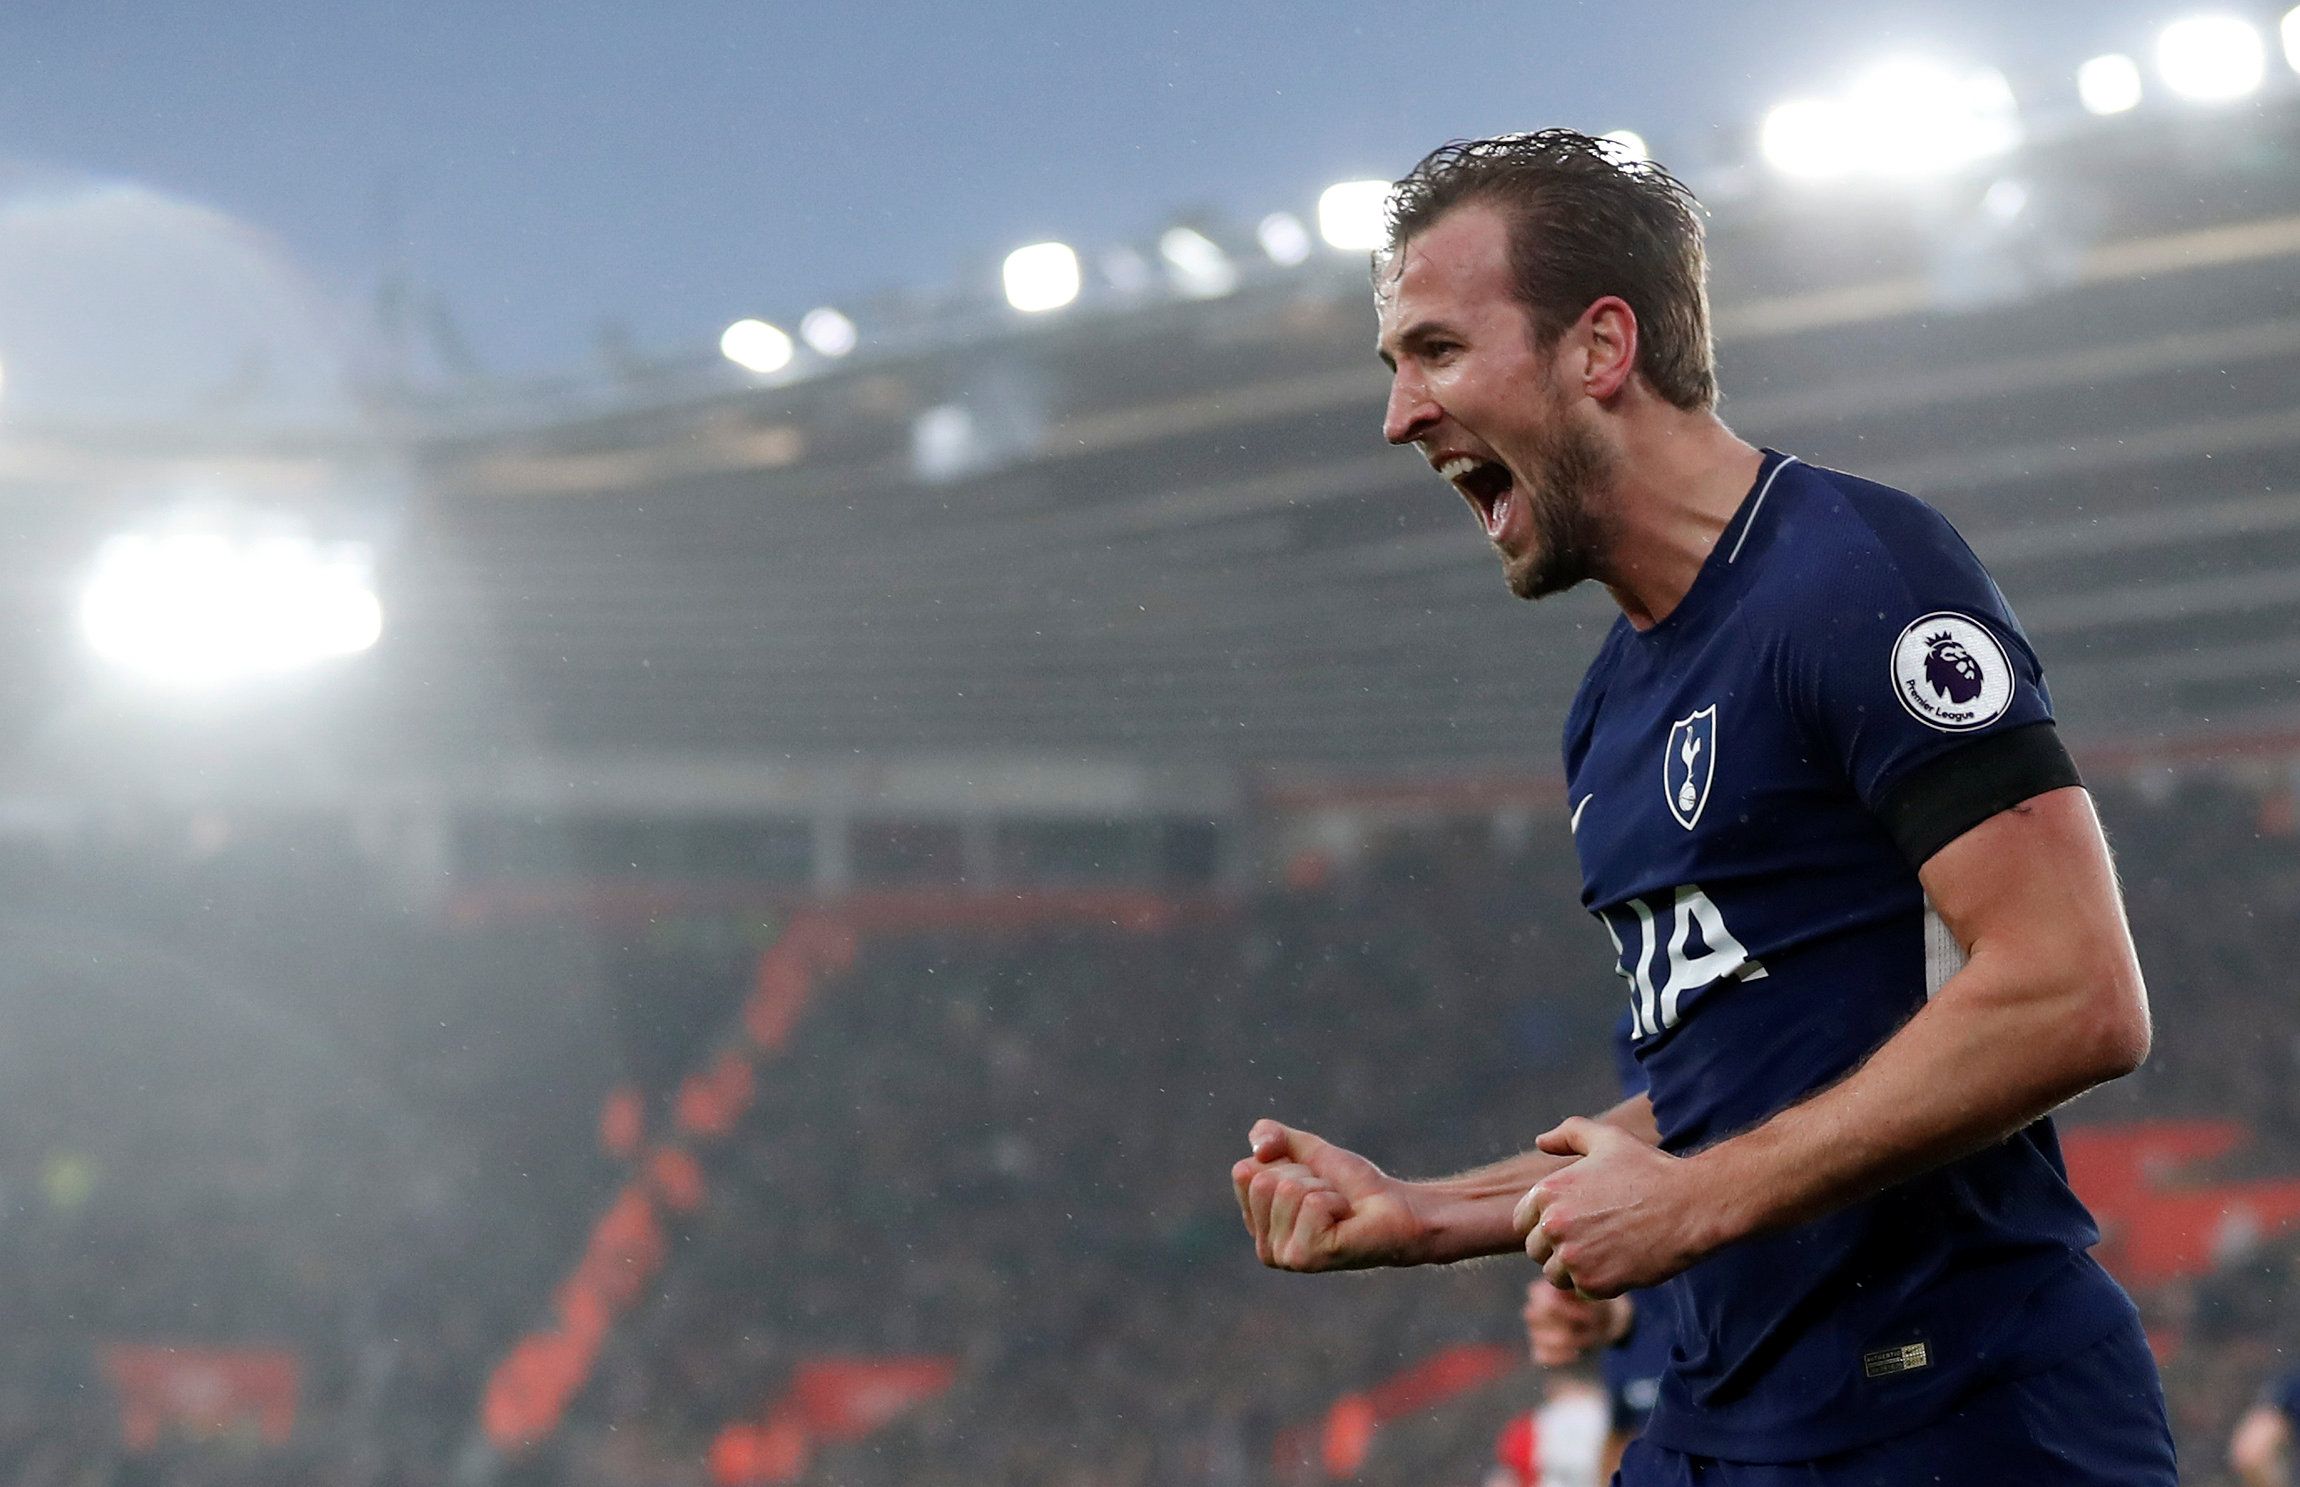 Soccer Football - Premier League - Southampton vs Tottenham Hotspur - St Mary's Stadium, Southampton, Britain - January 21, 2018   Tottenham's Harry Kane celebrates scoring their first goal         Action Images via Reuters/Matthew Childs    EDITORIAL USE ONLY. No use with unauthorized audio, video, data, fixture lists, club/league logos or 